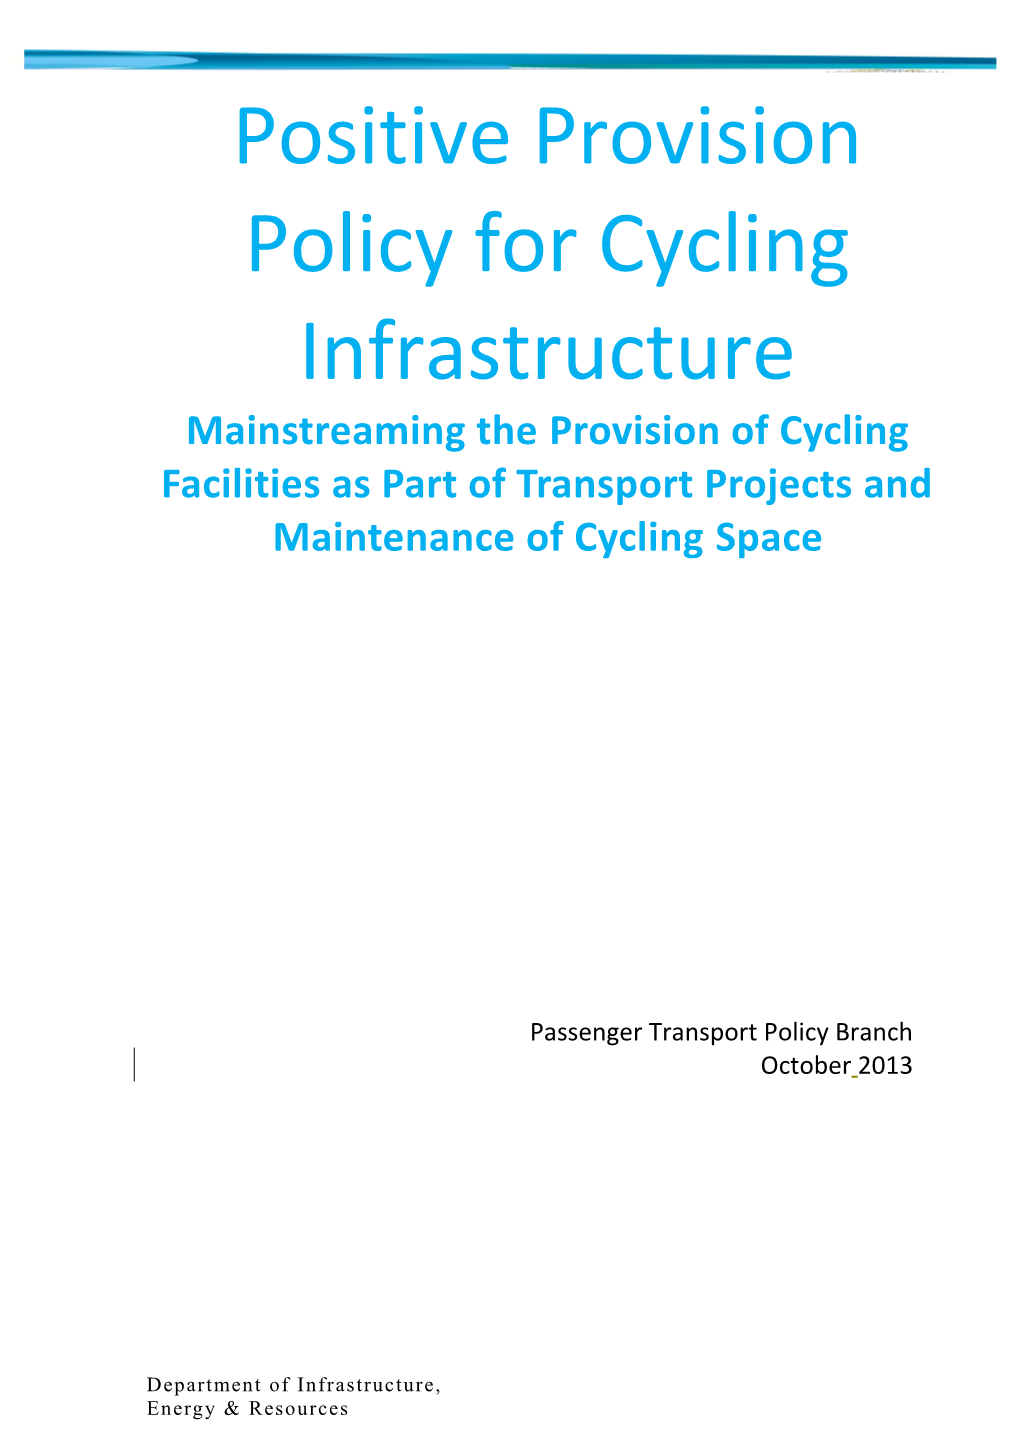 Positive Provision Policy for Cycling Infrastructure